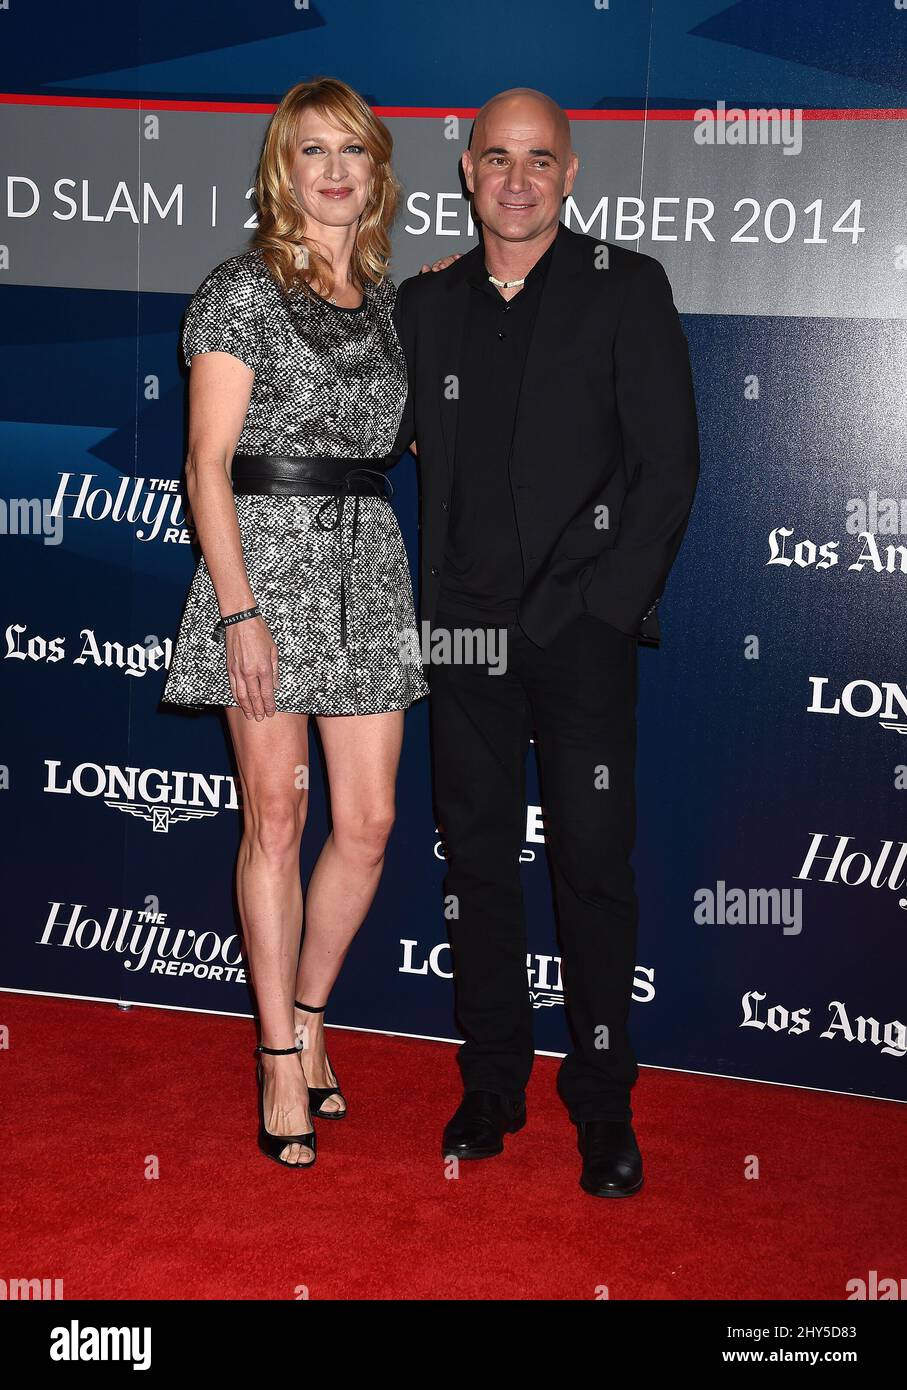 Steffi Graf & Andre Agassi during the Longines Los Angeles Masters Charity Pro-Am held at the Los Angeles Convention Center. Stock Photo